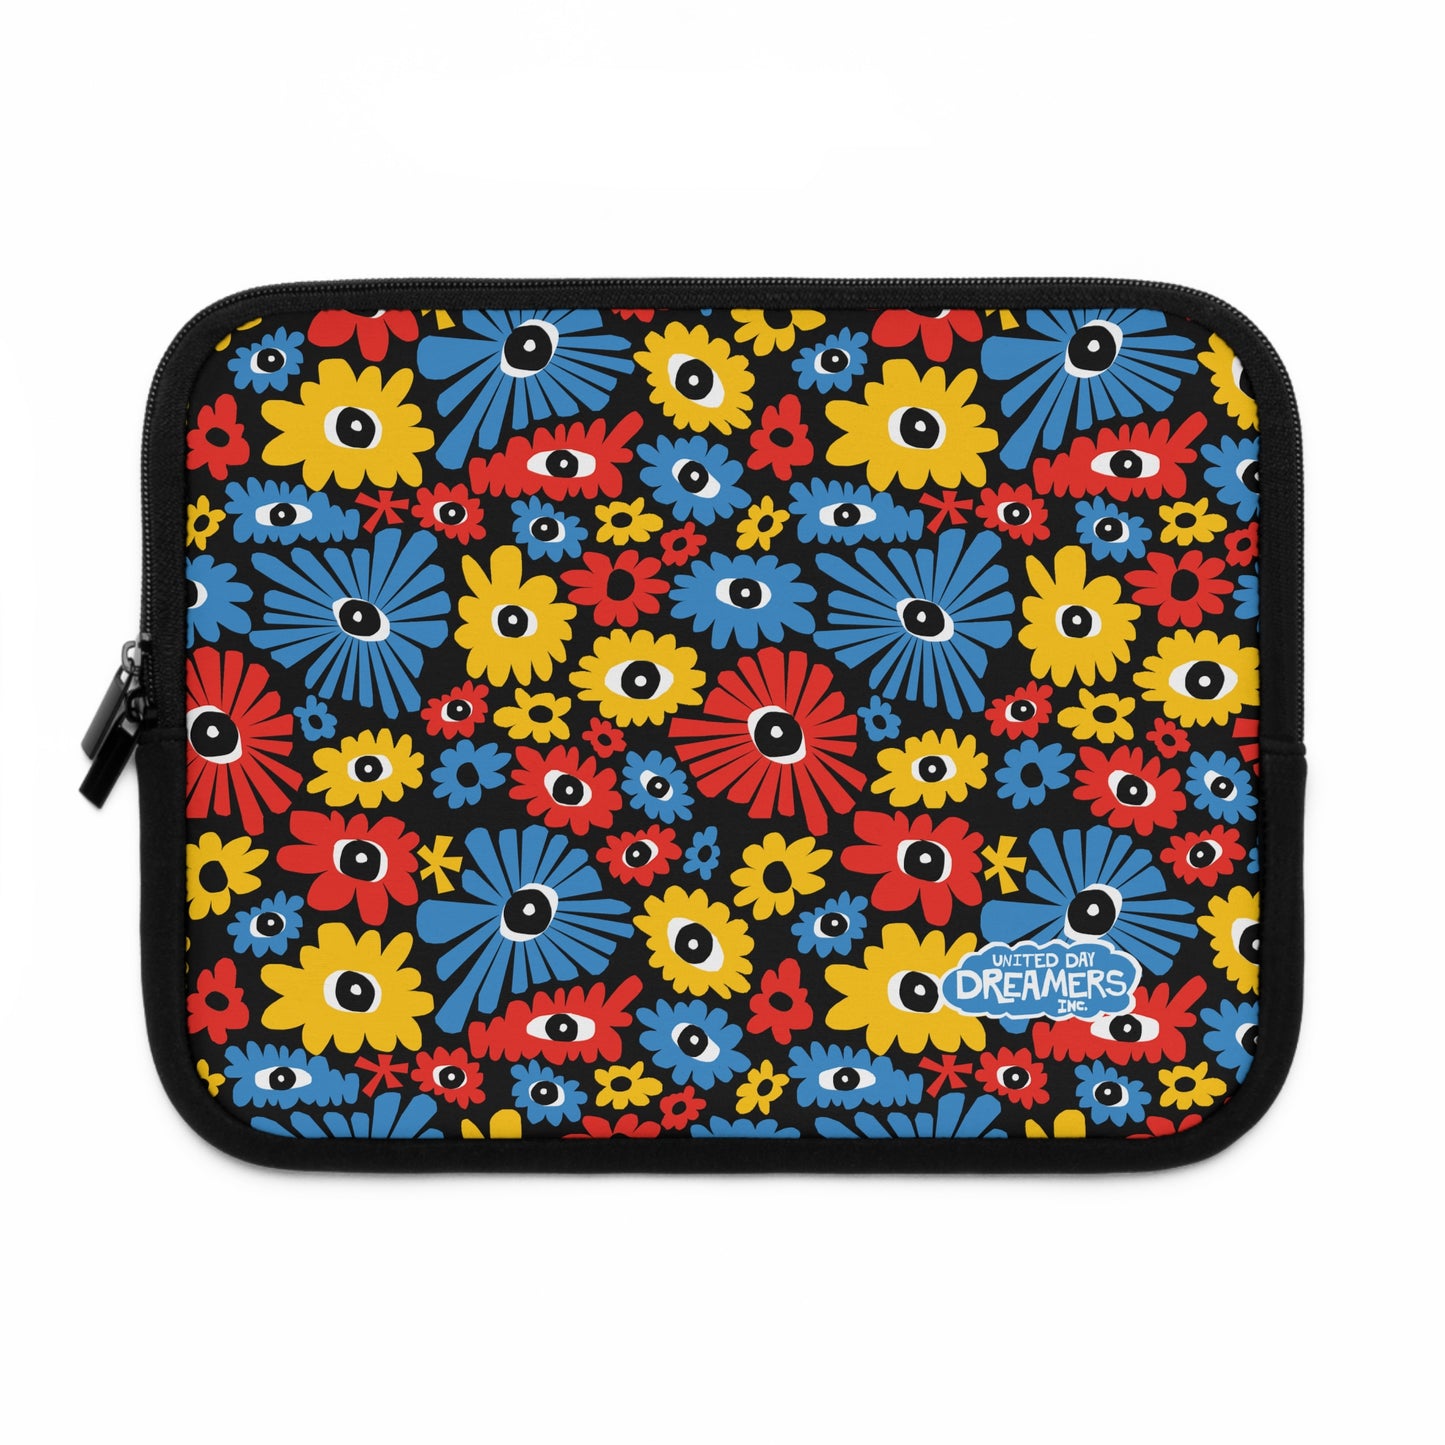 Colorful Case Sleeve For MacBook Pro And Any Other 10 to 17 Inch Laptop Computer